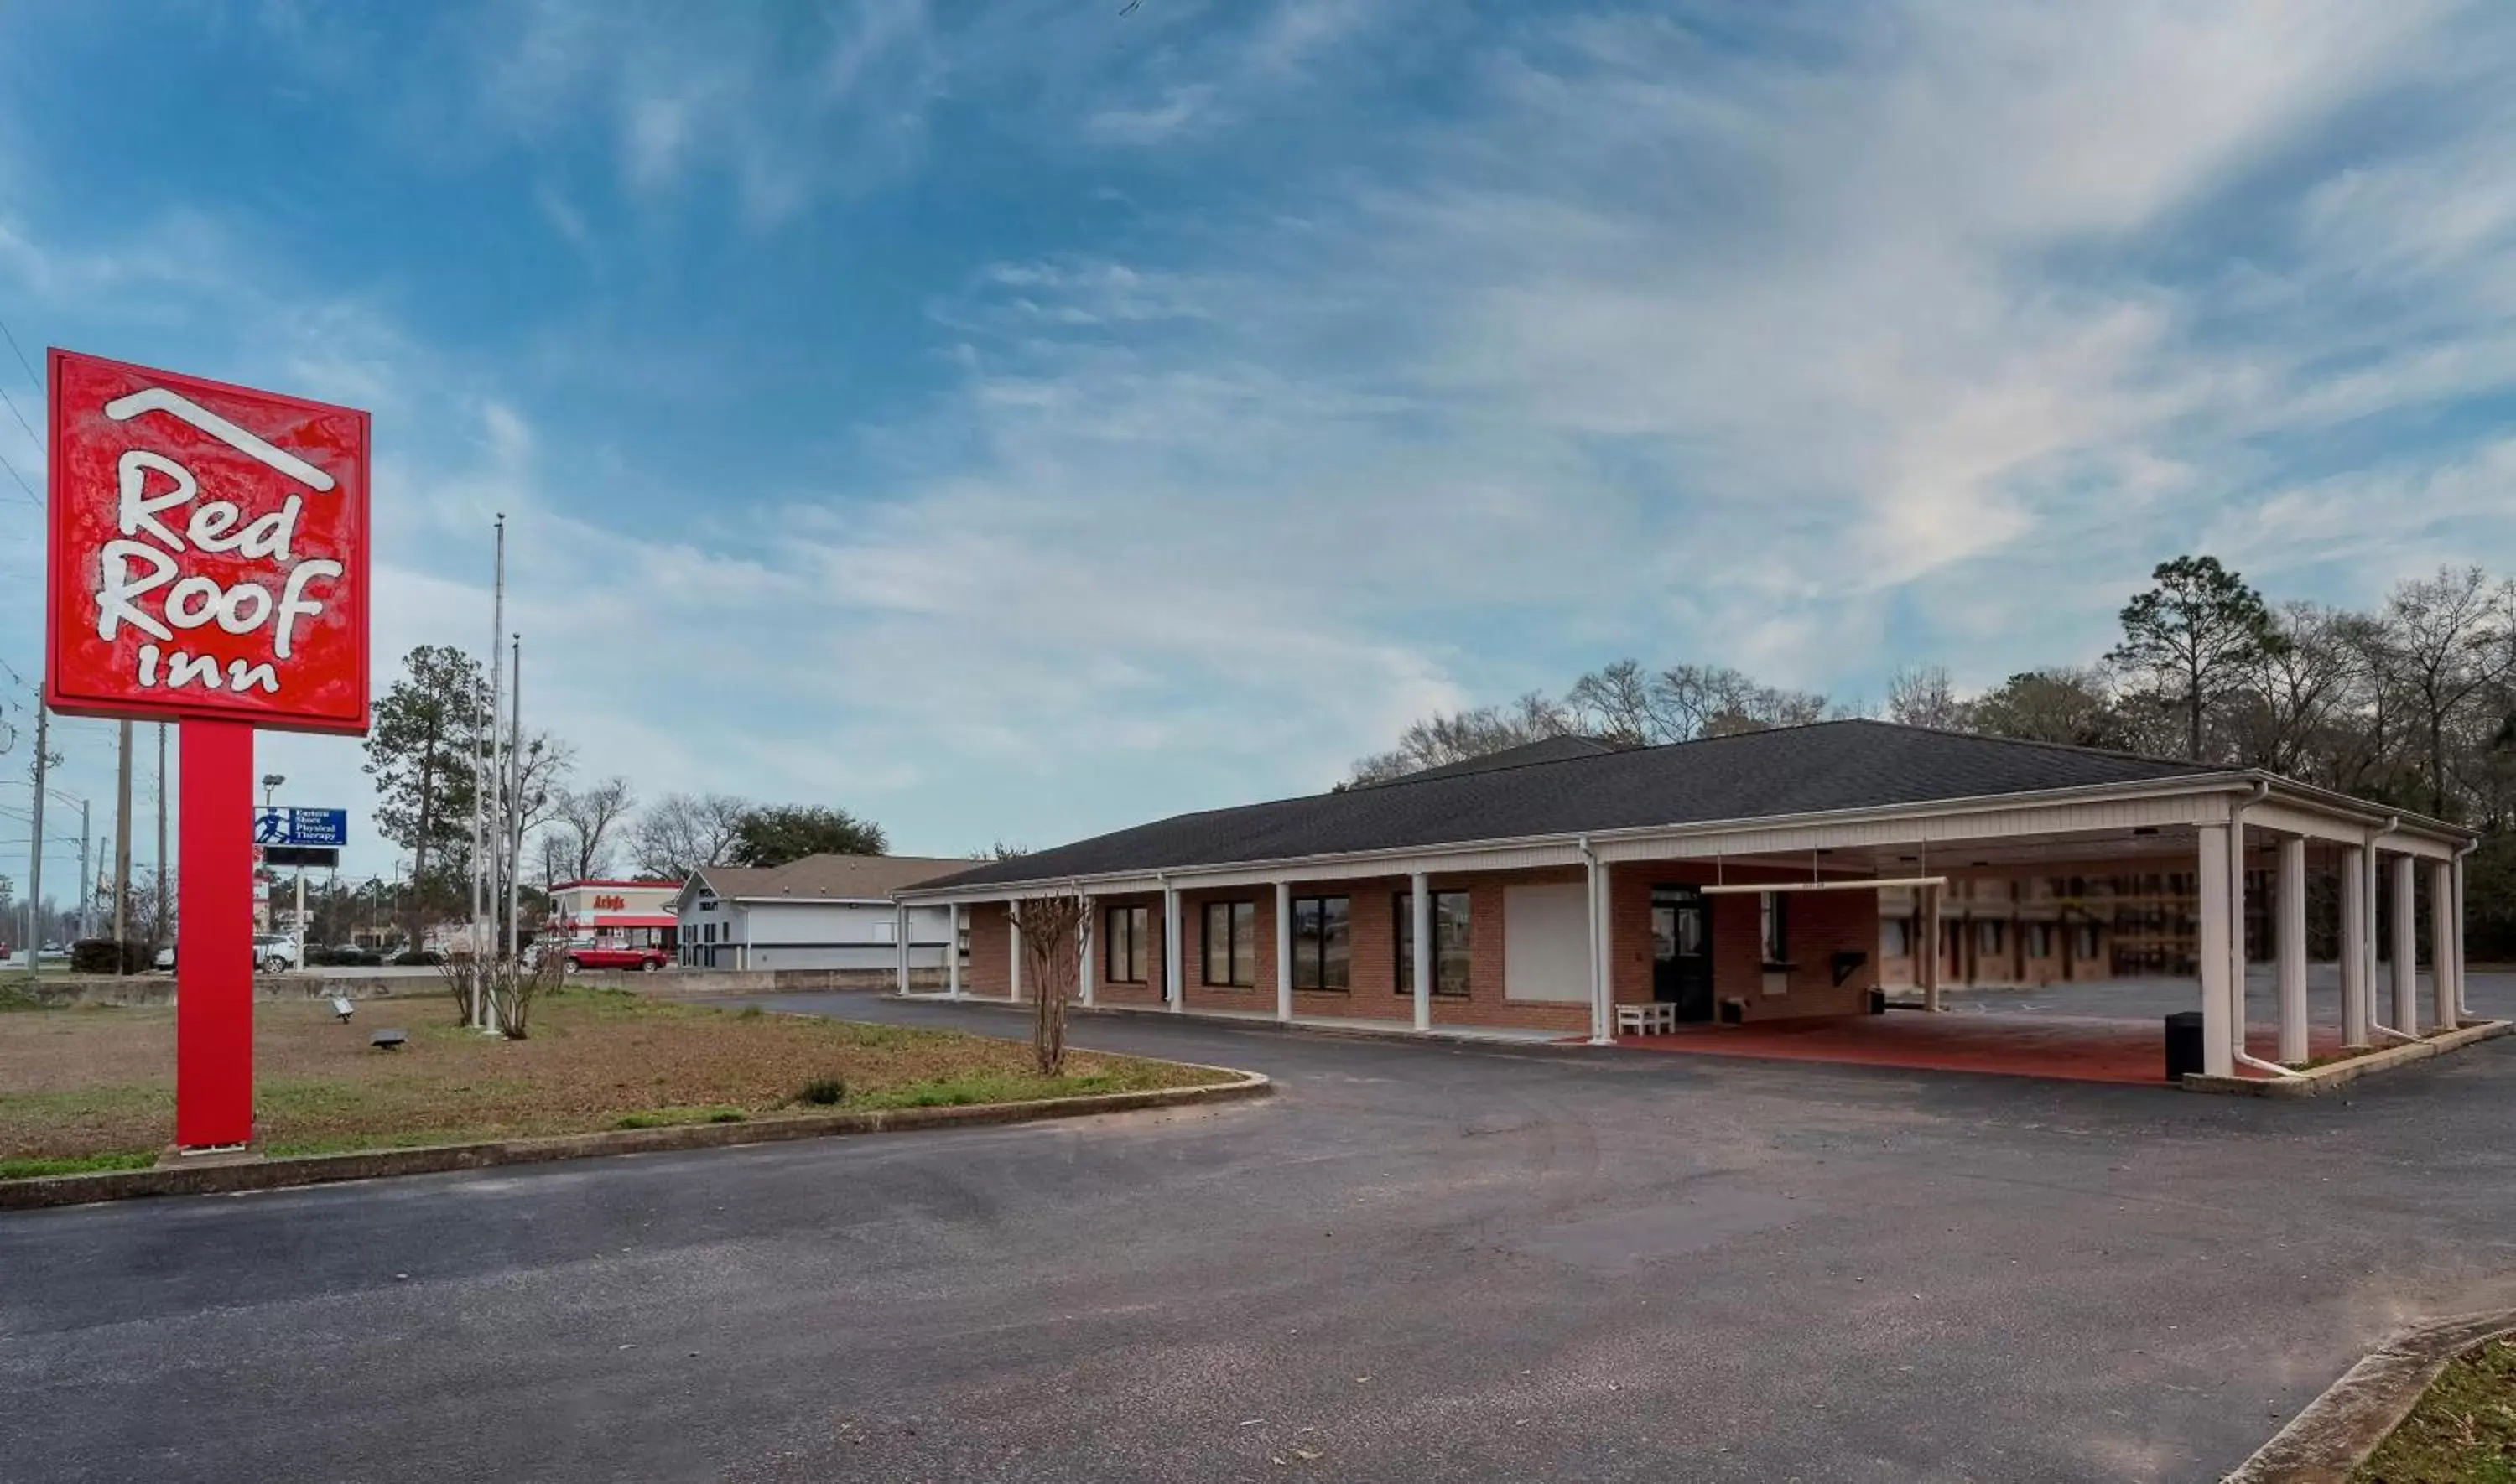 Property Building in Red Roof Inn Bay Minette